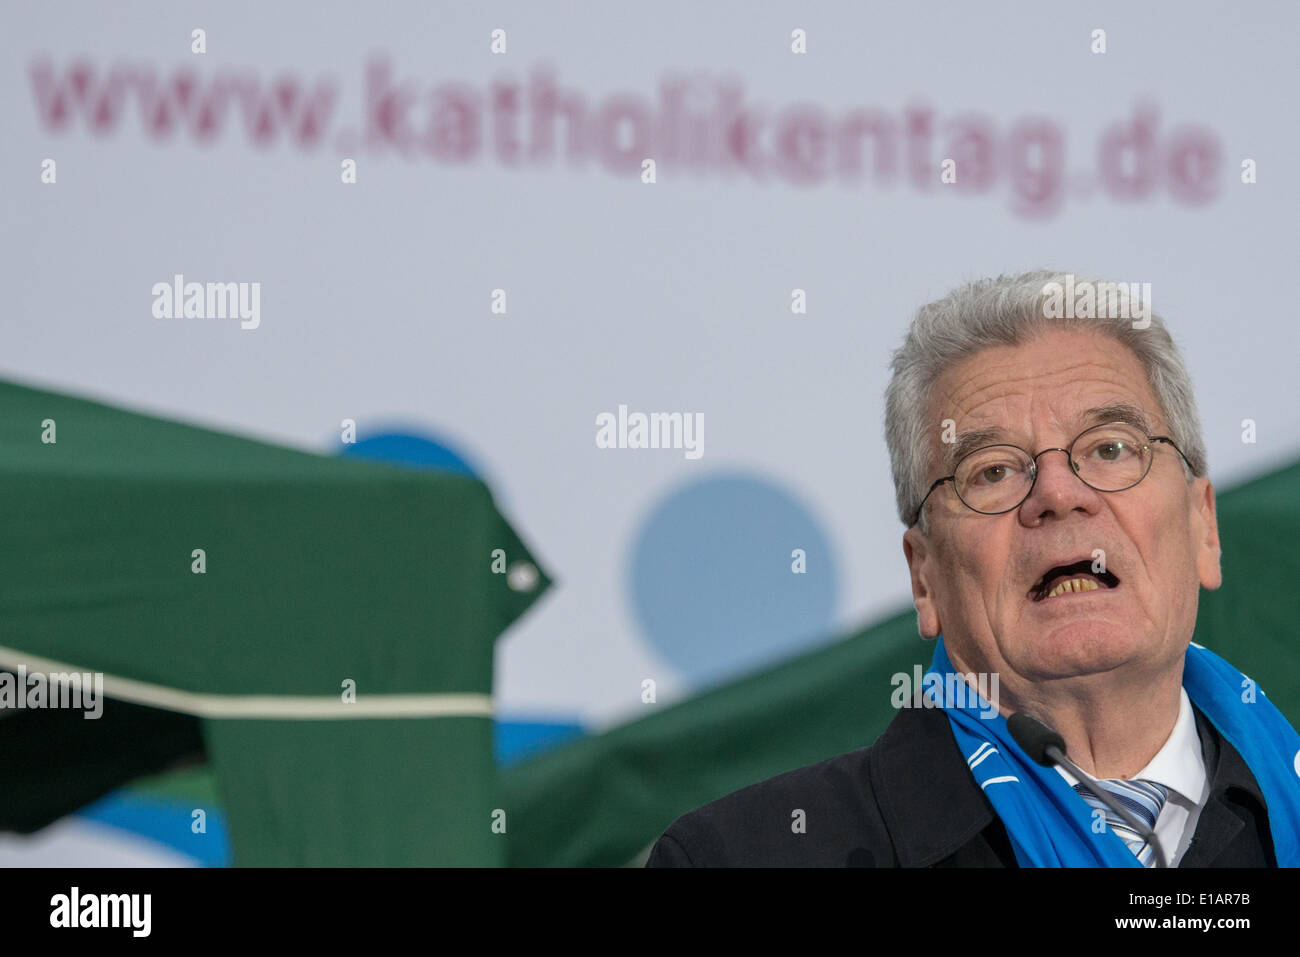 Regensburg, Germany. 28th May, 2014. President of Germany, Joachim Gauck, speaks during the opening ceremony of the 99th German Catholics Day in Regensburg, Germany, 28 May 2014. Ten-thousands of believers are expected in Regensburg for the five day event. Photo: ARMIN WEIGEL/dpa/Alamy Live News Stock Photo